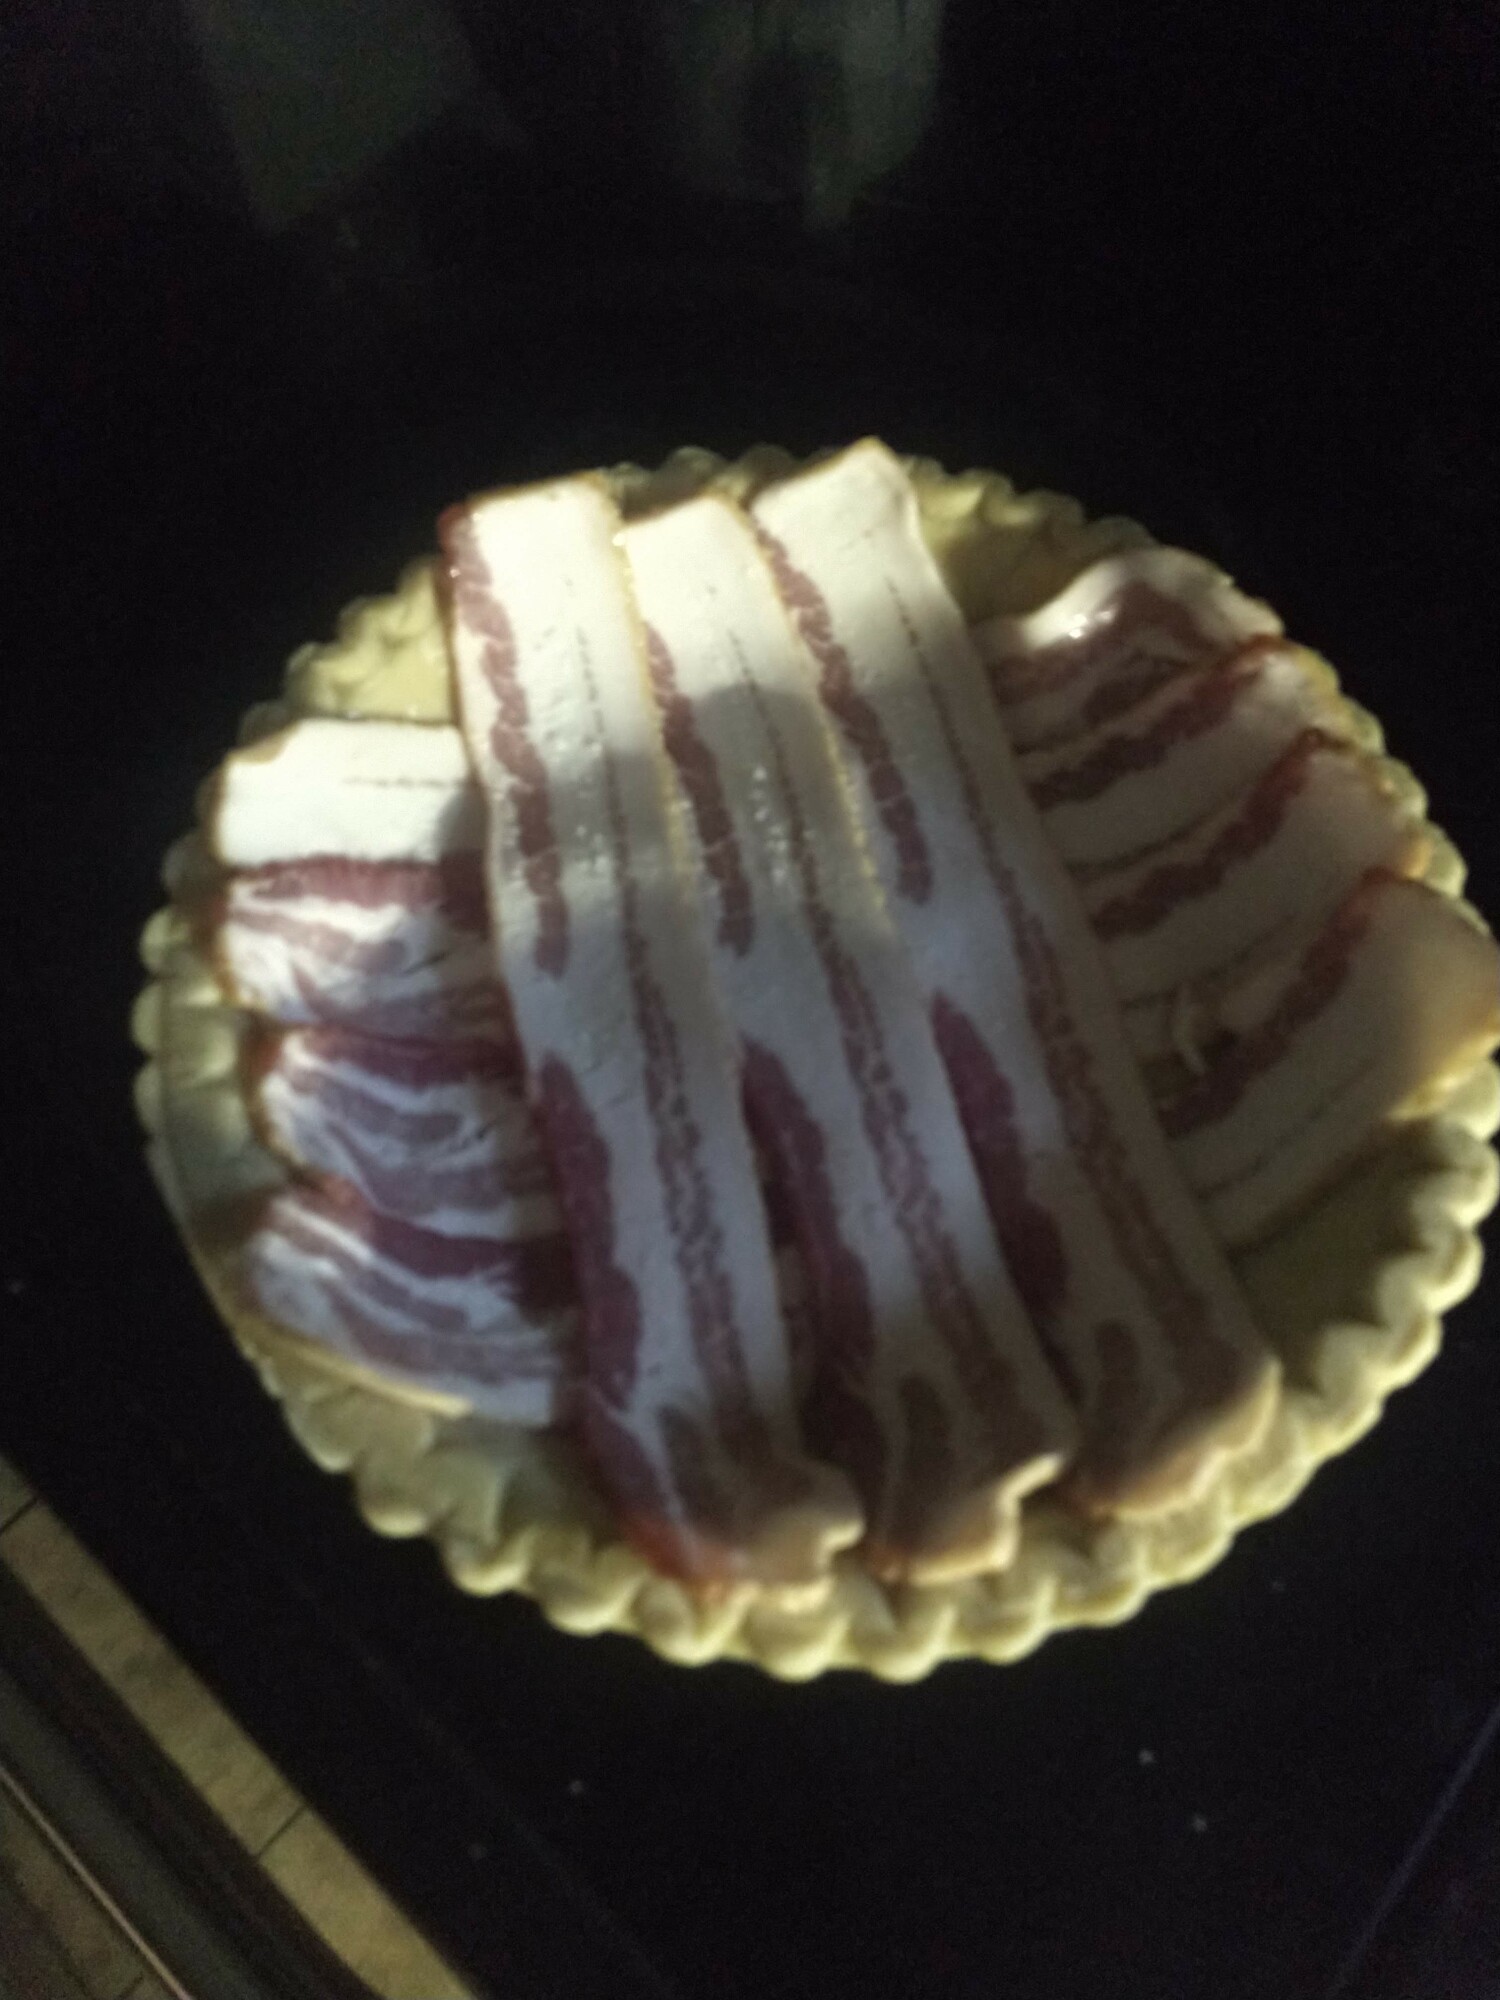 Frozen pie crust with uncooked bacon layered on it